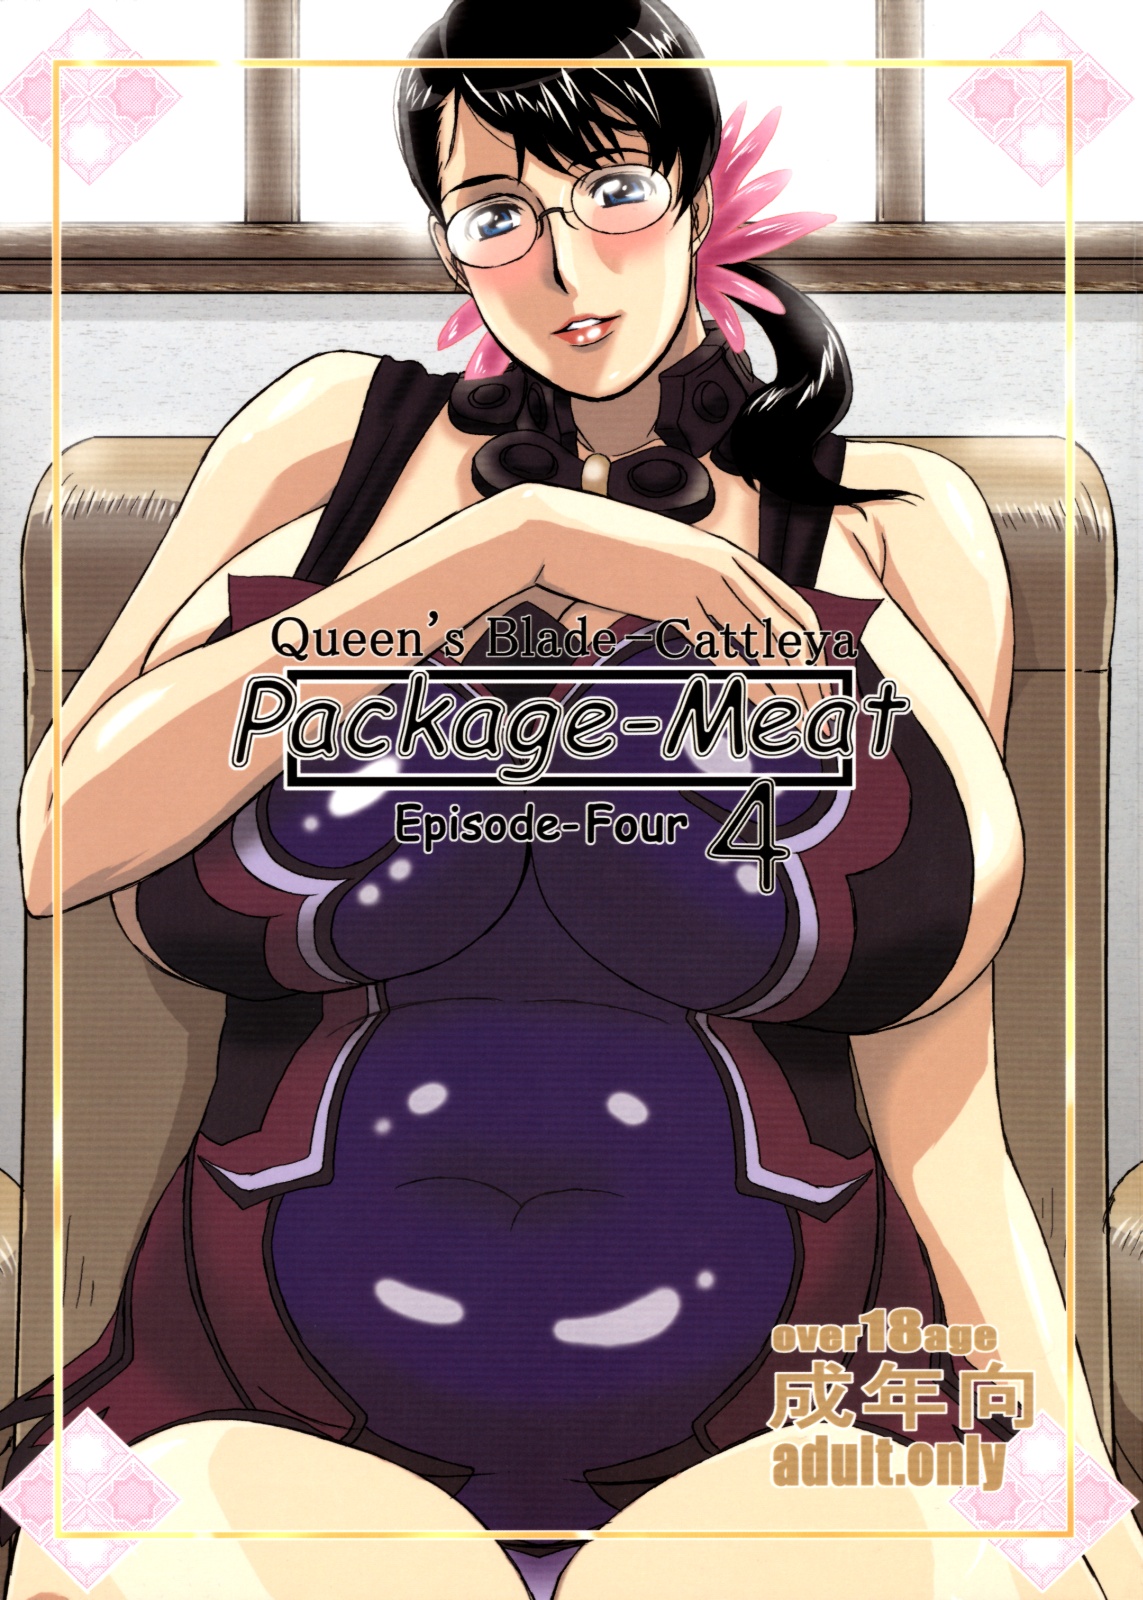 (C75) [Shiawase Pullin Dou (Ninroku)] Package-Meat 4 (Queen's Blade) [Spanish] [Abstractosis] (C75) [しあわせプリン堂 (認六)] Package Meat 4 (クイーンズブレイド) [スペイン翻訳]